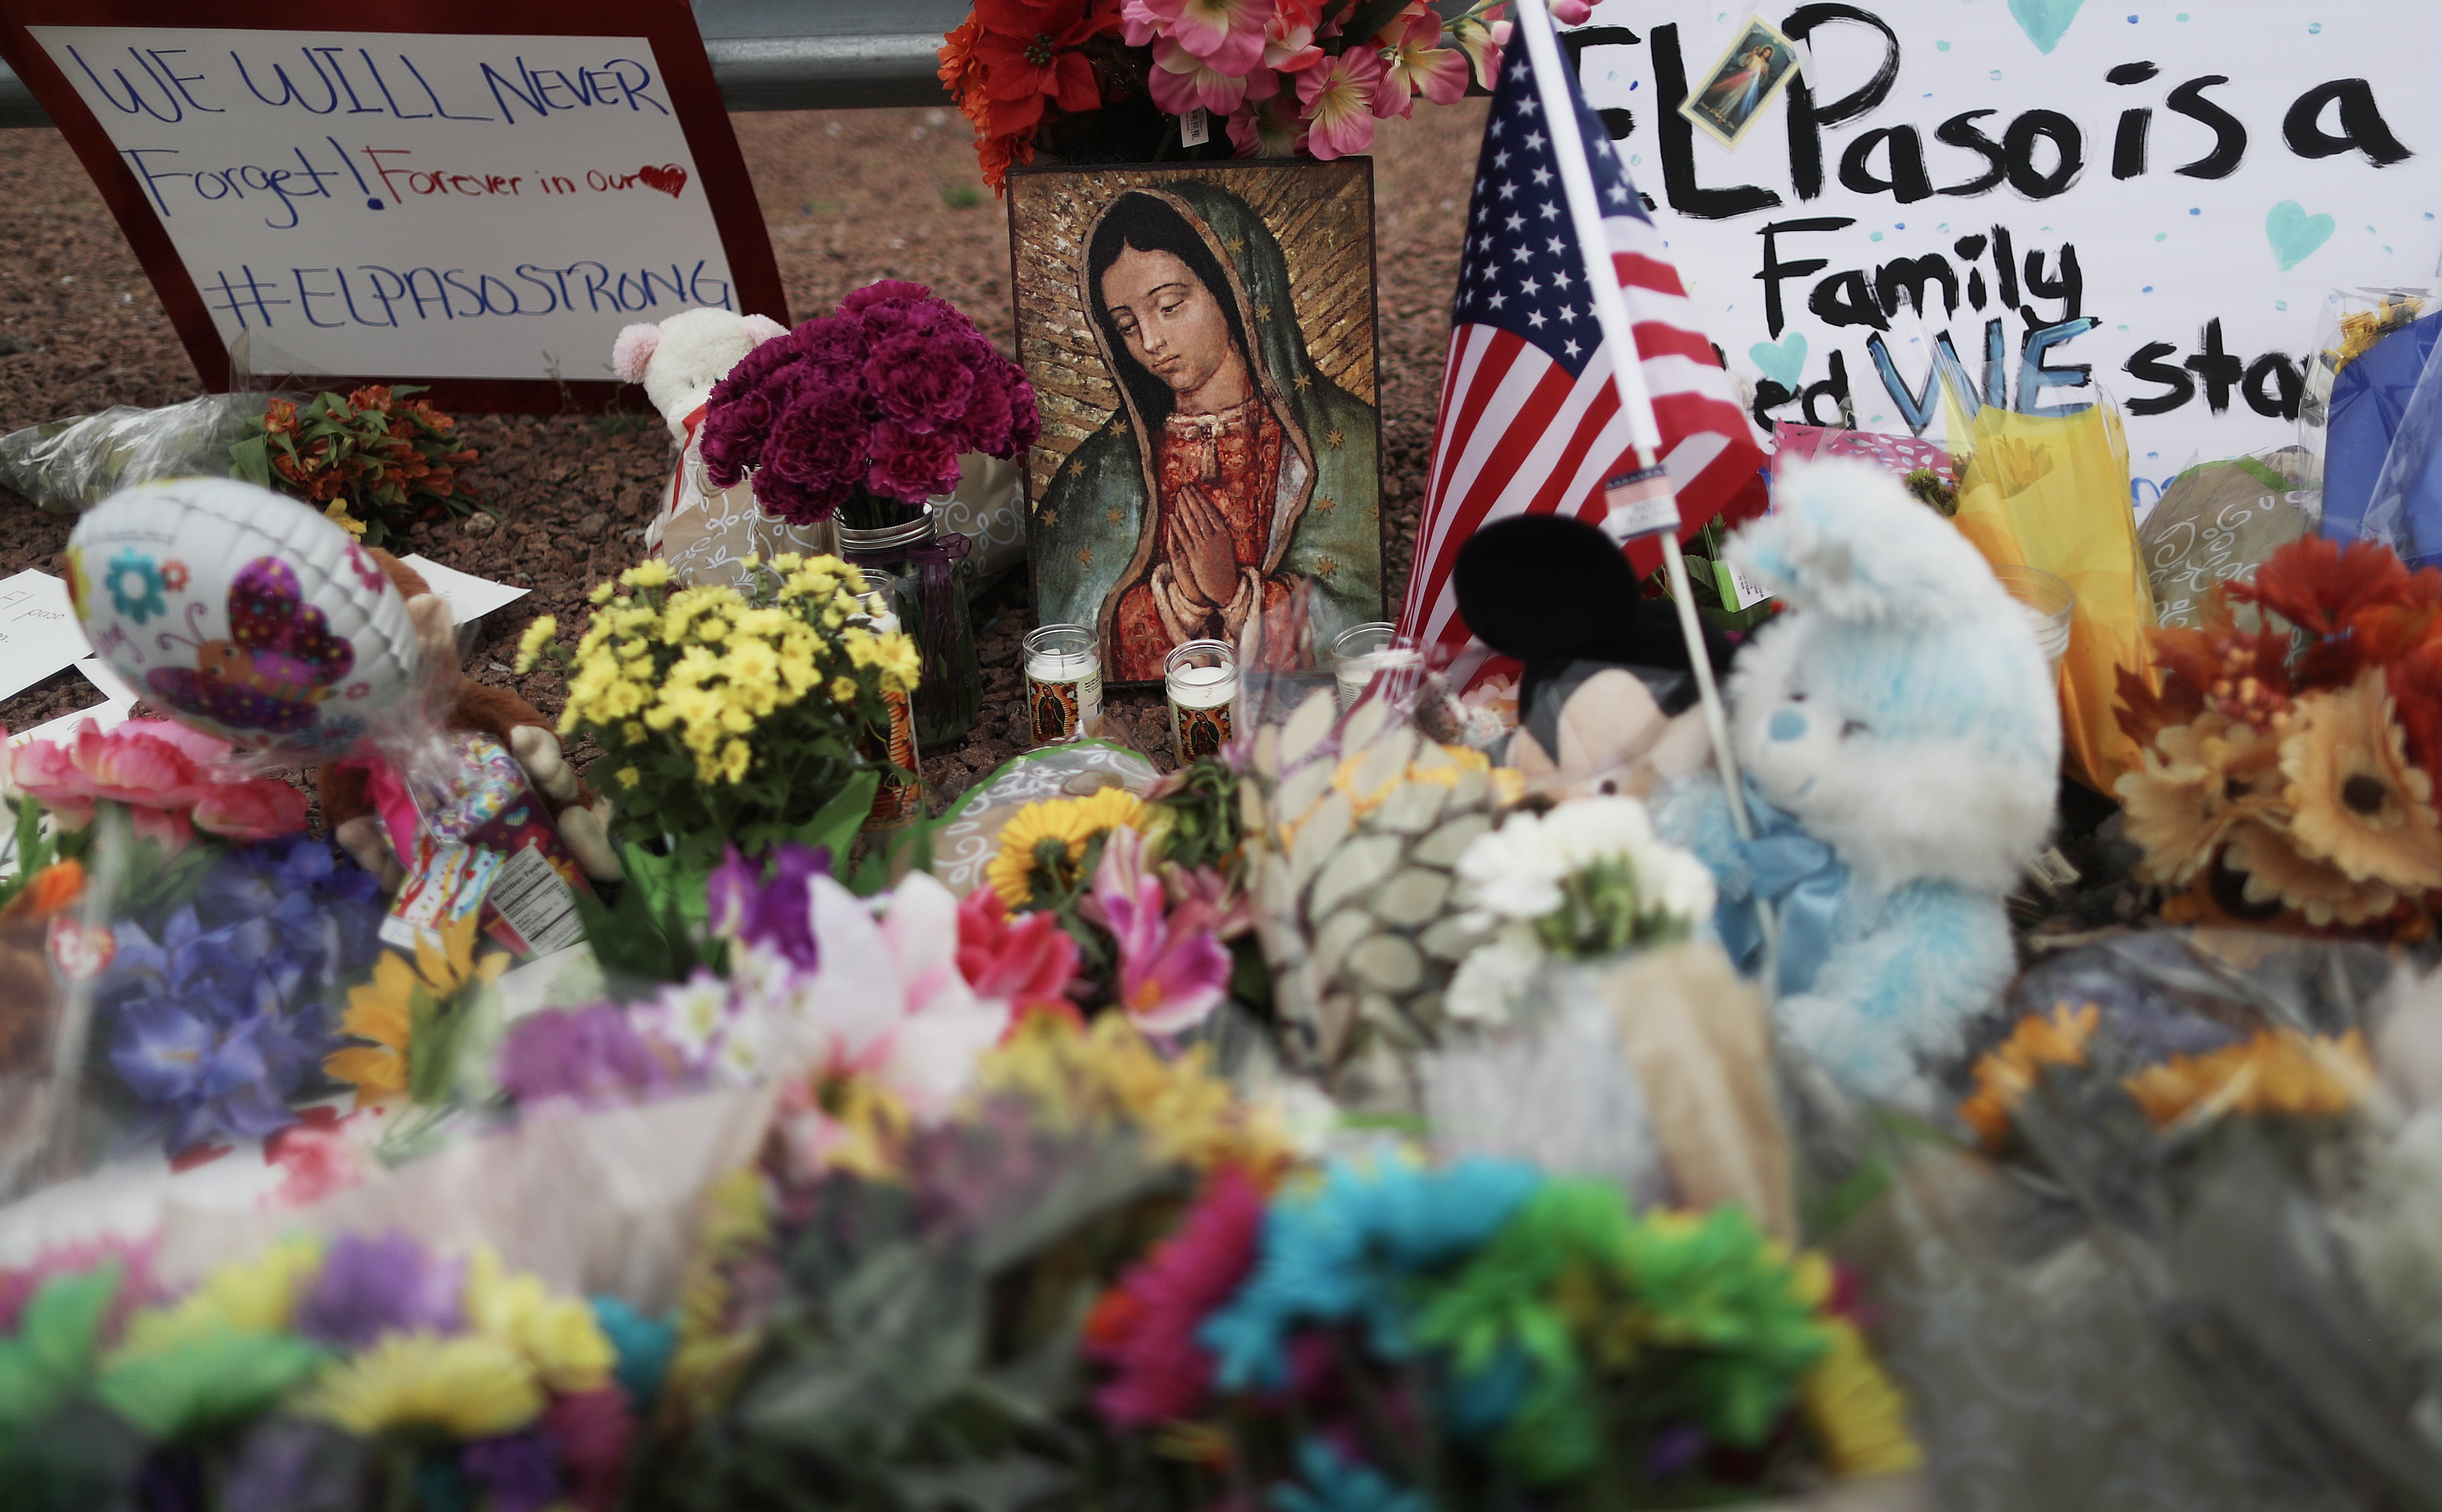 Flowers and mementos are seen at a makeshift memorial outside Walmart, near the scene of a mass shooting which left at least 20 people dead, on August 4, 2019 in El Paso, Texas. (Photo by Mario Tama/Getty Images)